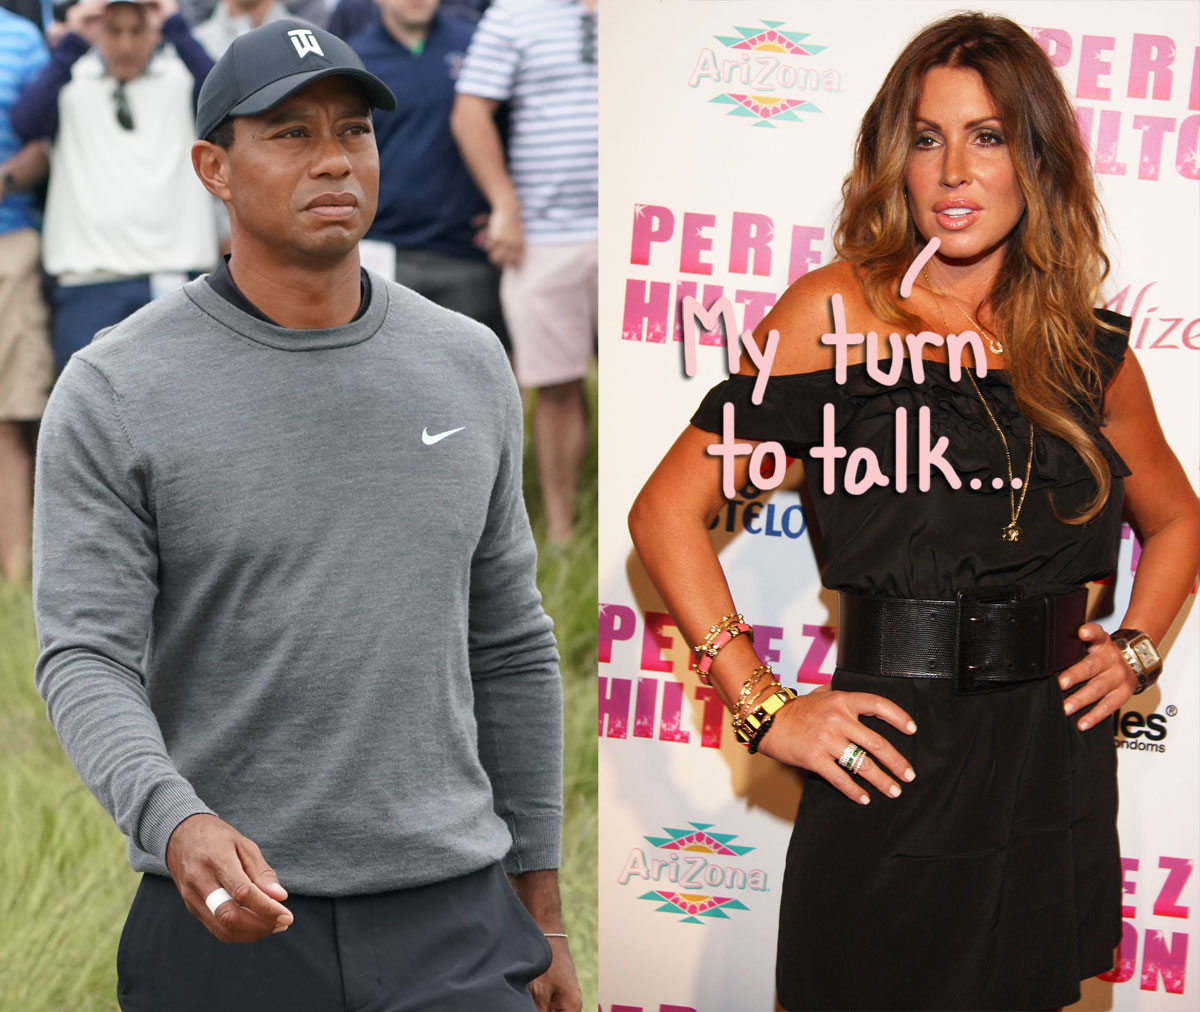 Tiger Woods Mistress Reveals His Last Text To Her In Upcoming Tell-All Documentary, And HOO BOY!